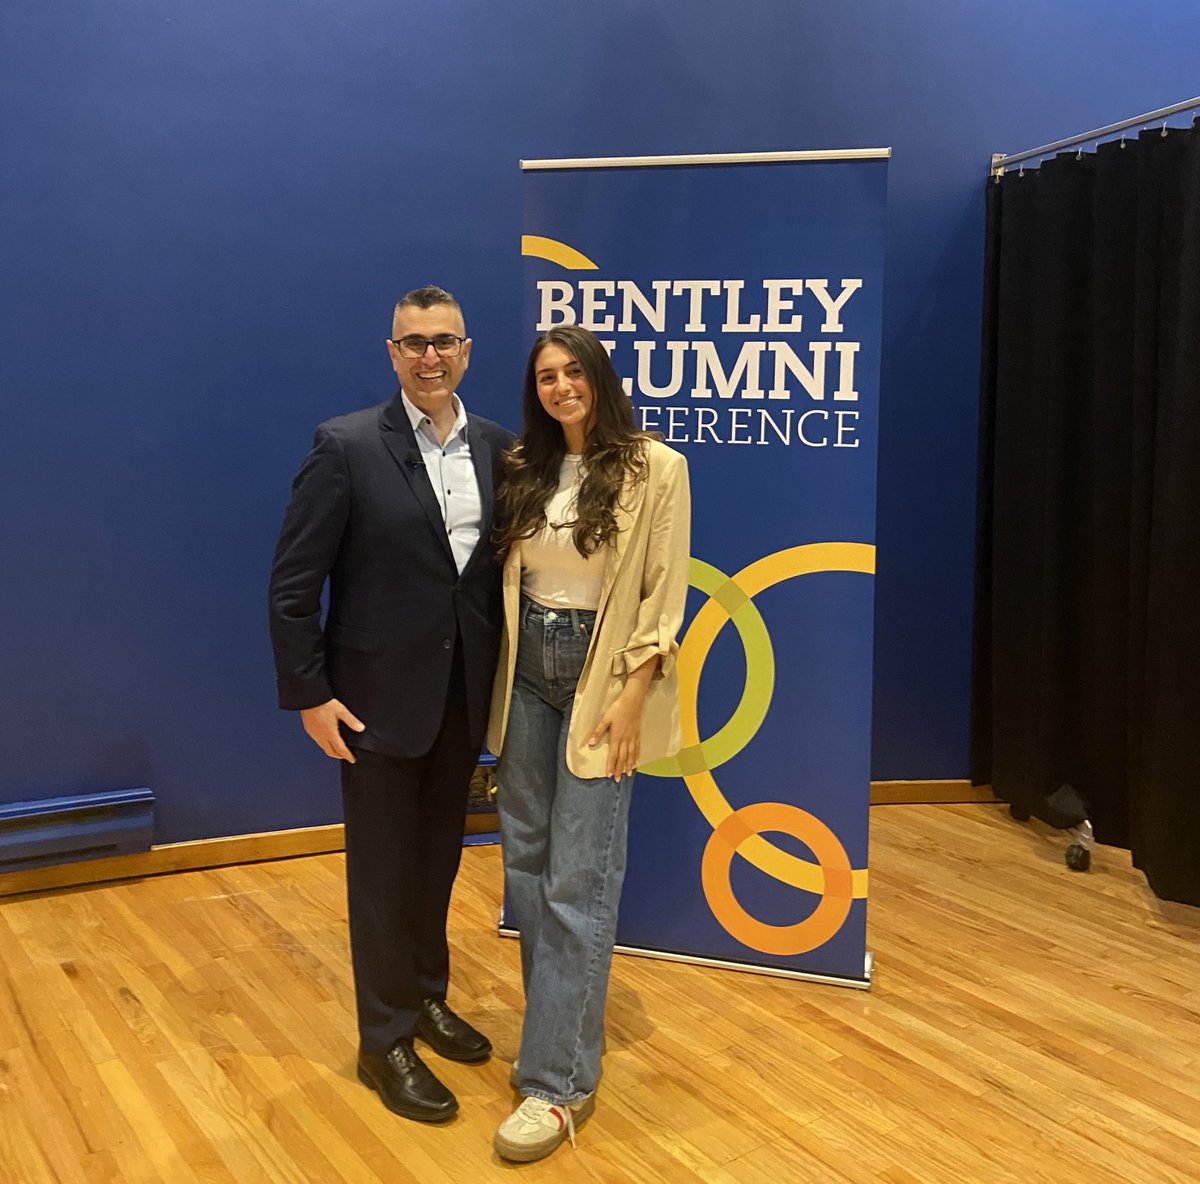 @bentleyu thank you for giving me the opportunity to share my research on how companies can best compete in an AI powered economy. @bentleyalumni Donya said I did a good job; very cool!